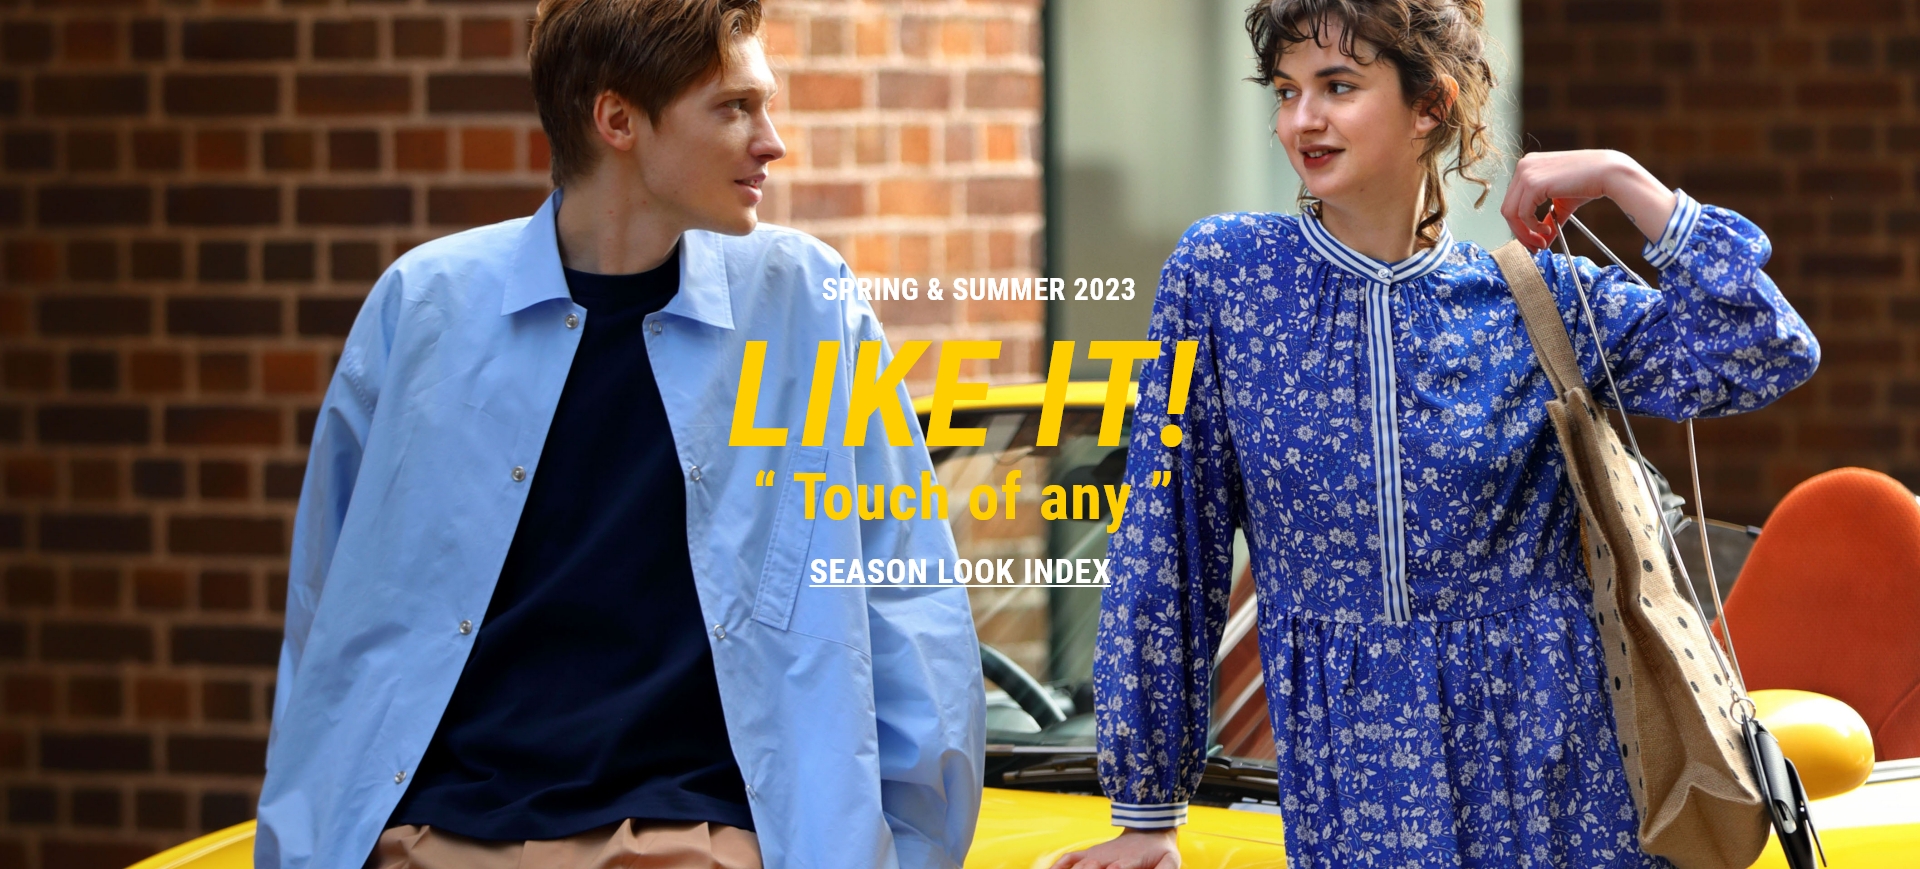 SPRING & SUMMER 2023 LIKE IT! g Touch of any h SEASON LOOK INDEX